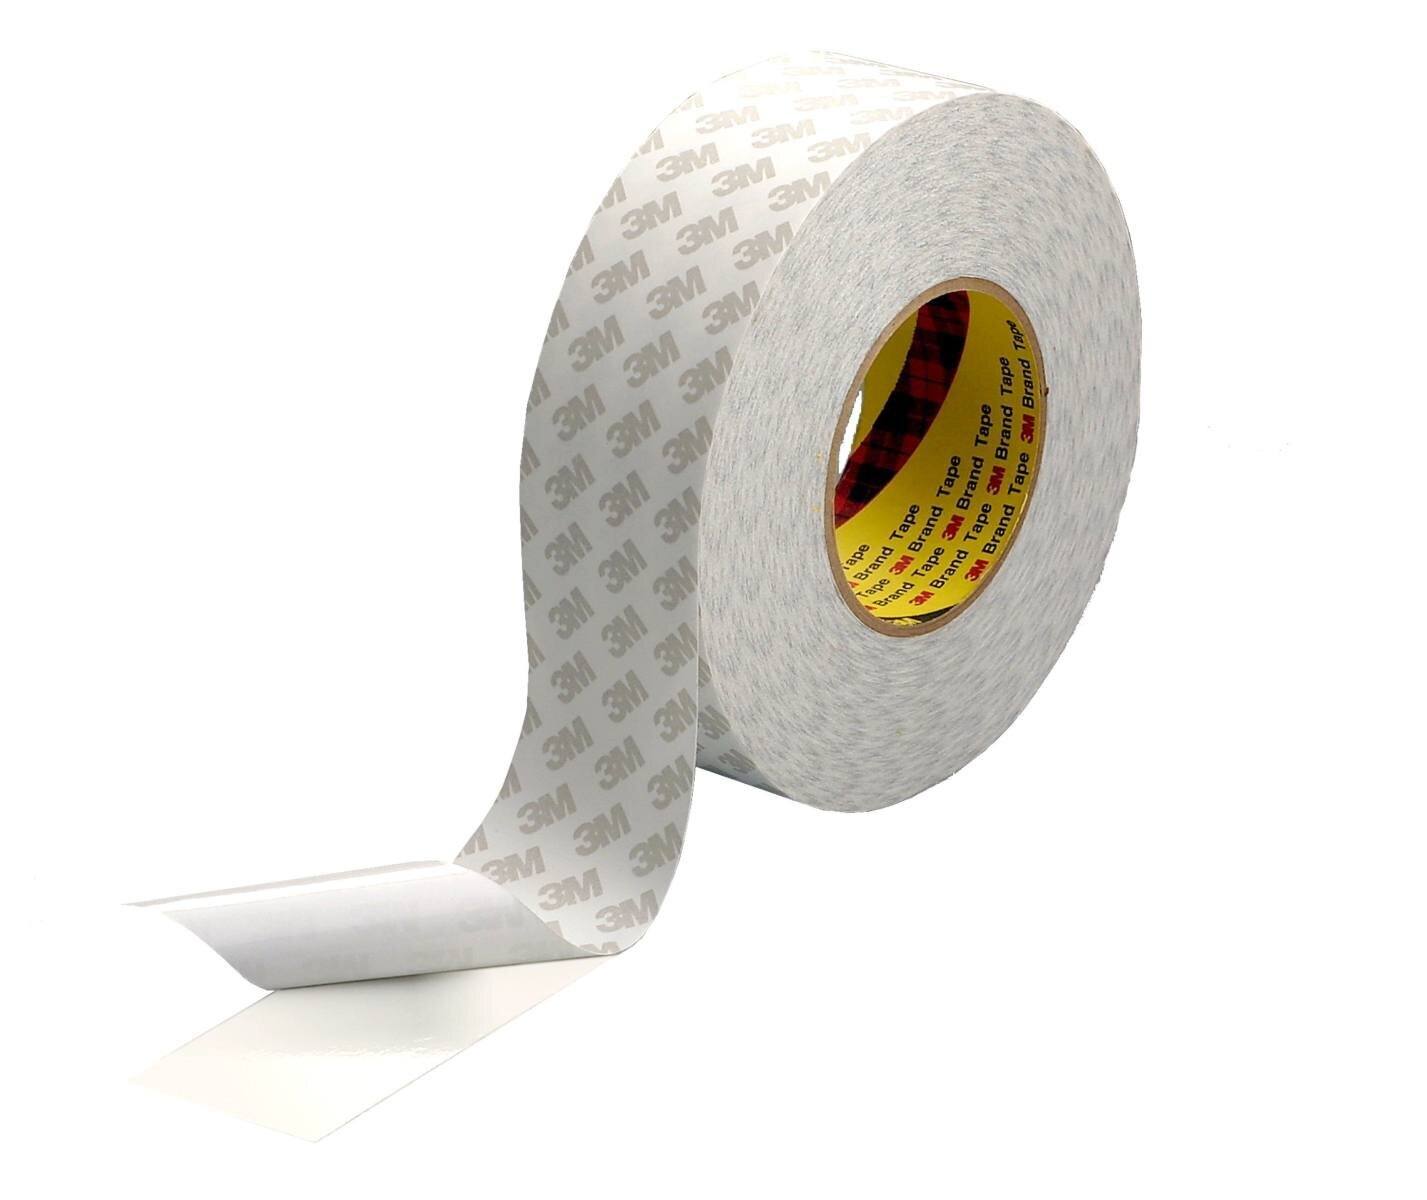 3M Double-sided adhesive tape with non-woven paper backing 9080HL, white, 1200 mm x 50 m, 0.16 mm